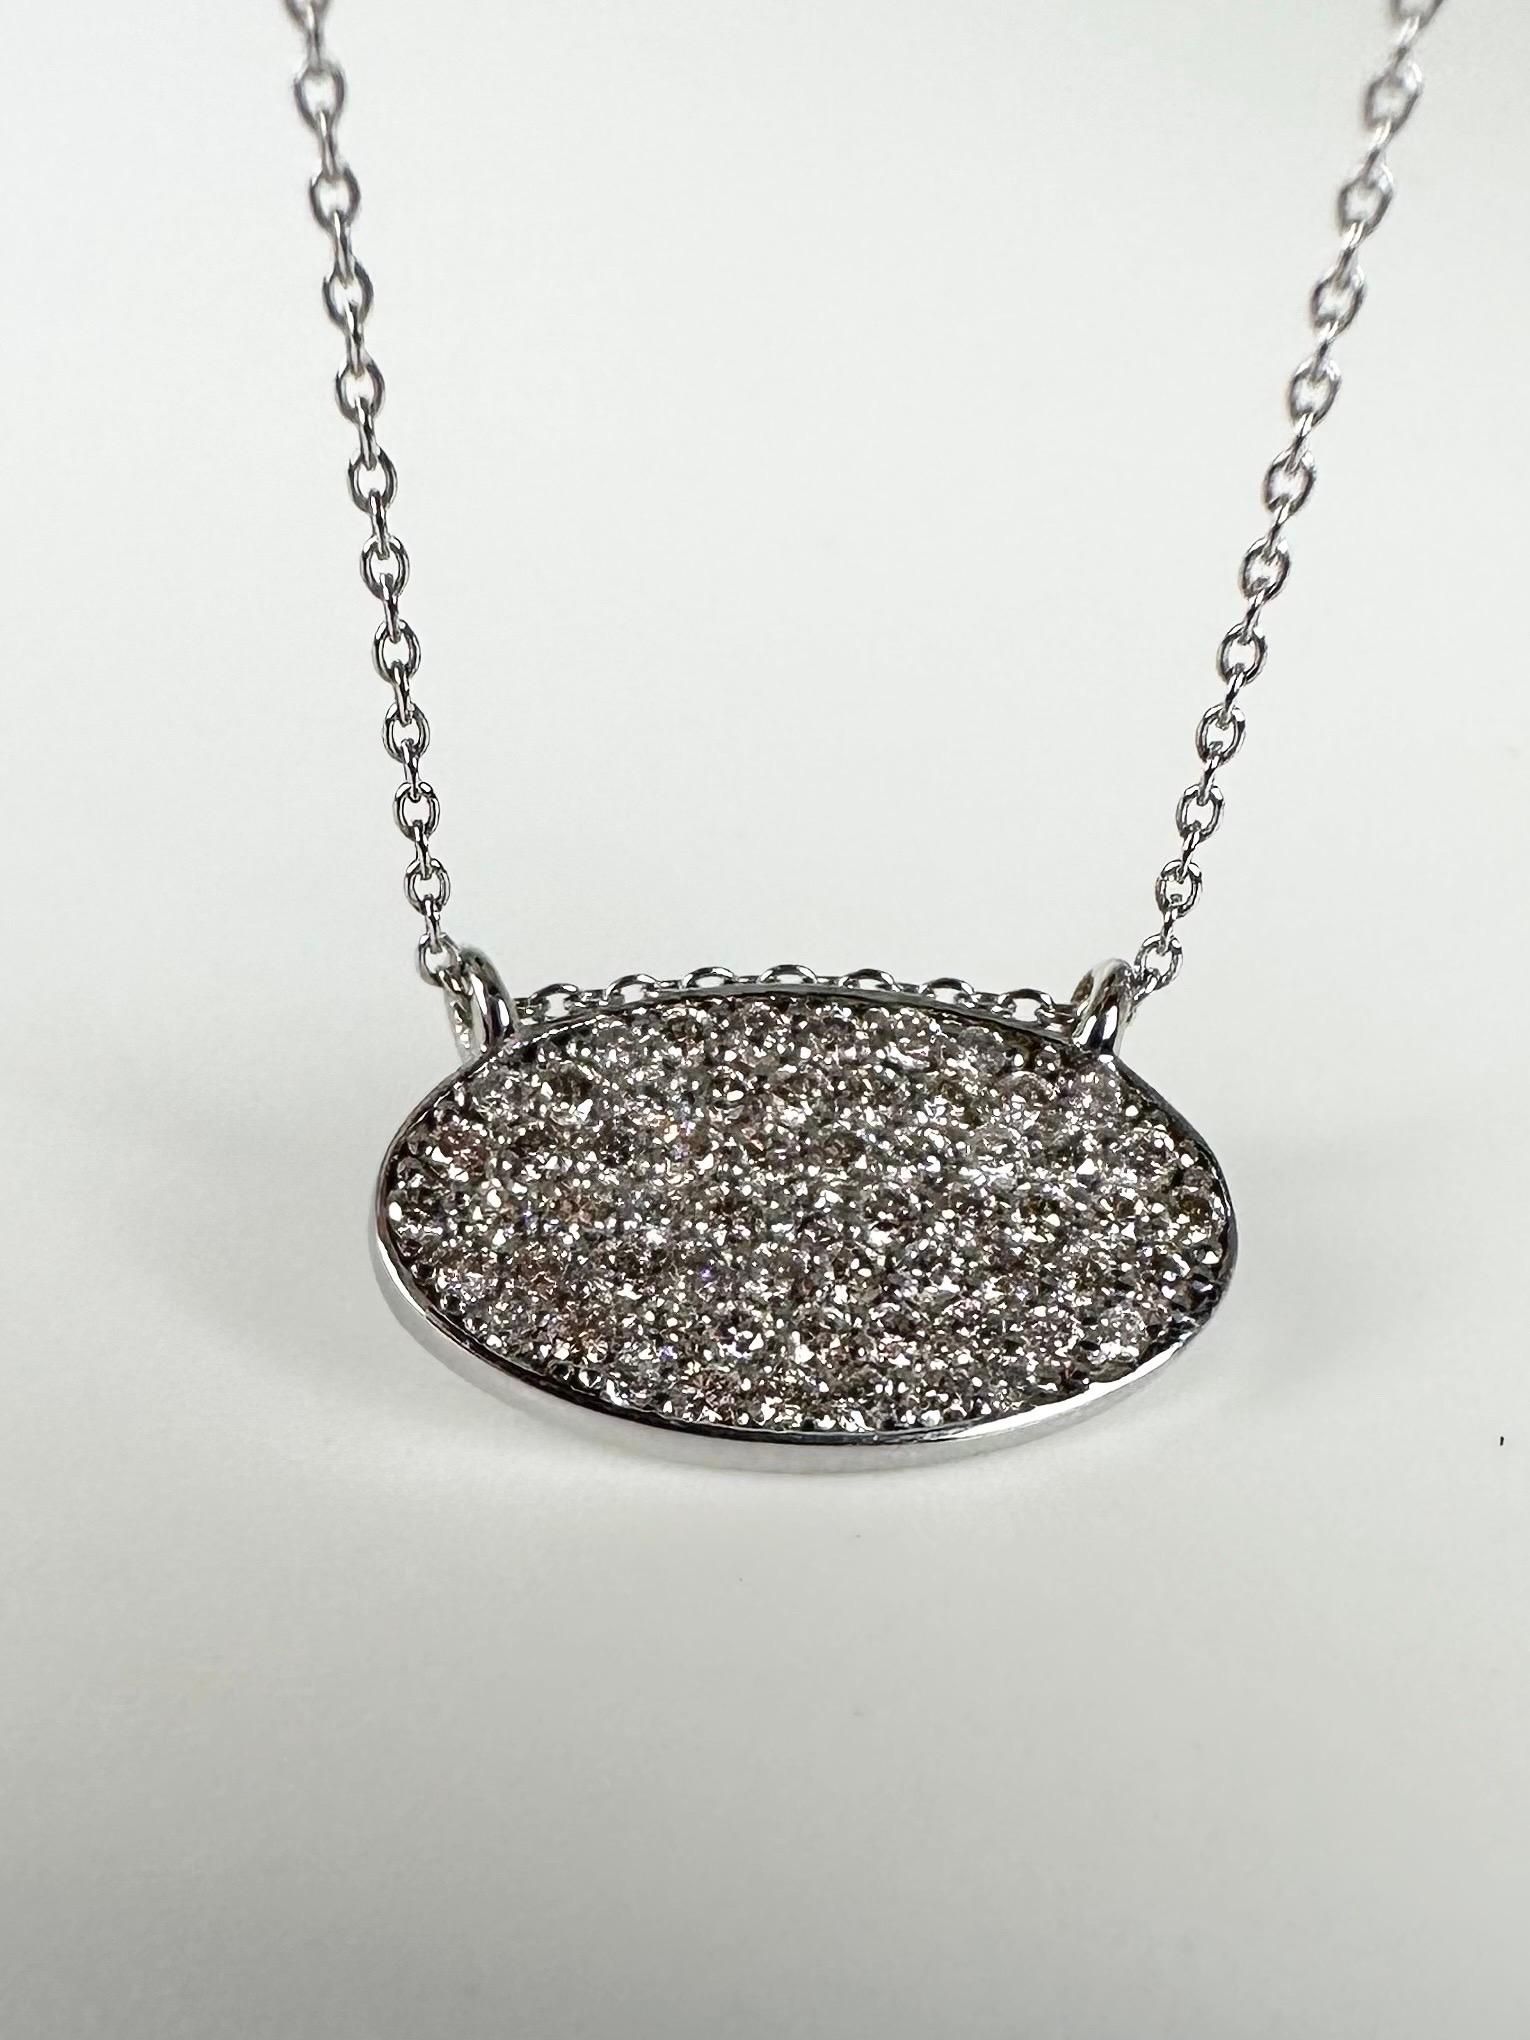 Modern oval pendant necklace in 14KT white gold, made as illusion to have maximum sparkle and very little gold between the diamonds, stunning pave set diamond pendant necklace. Chain is 18